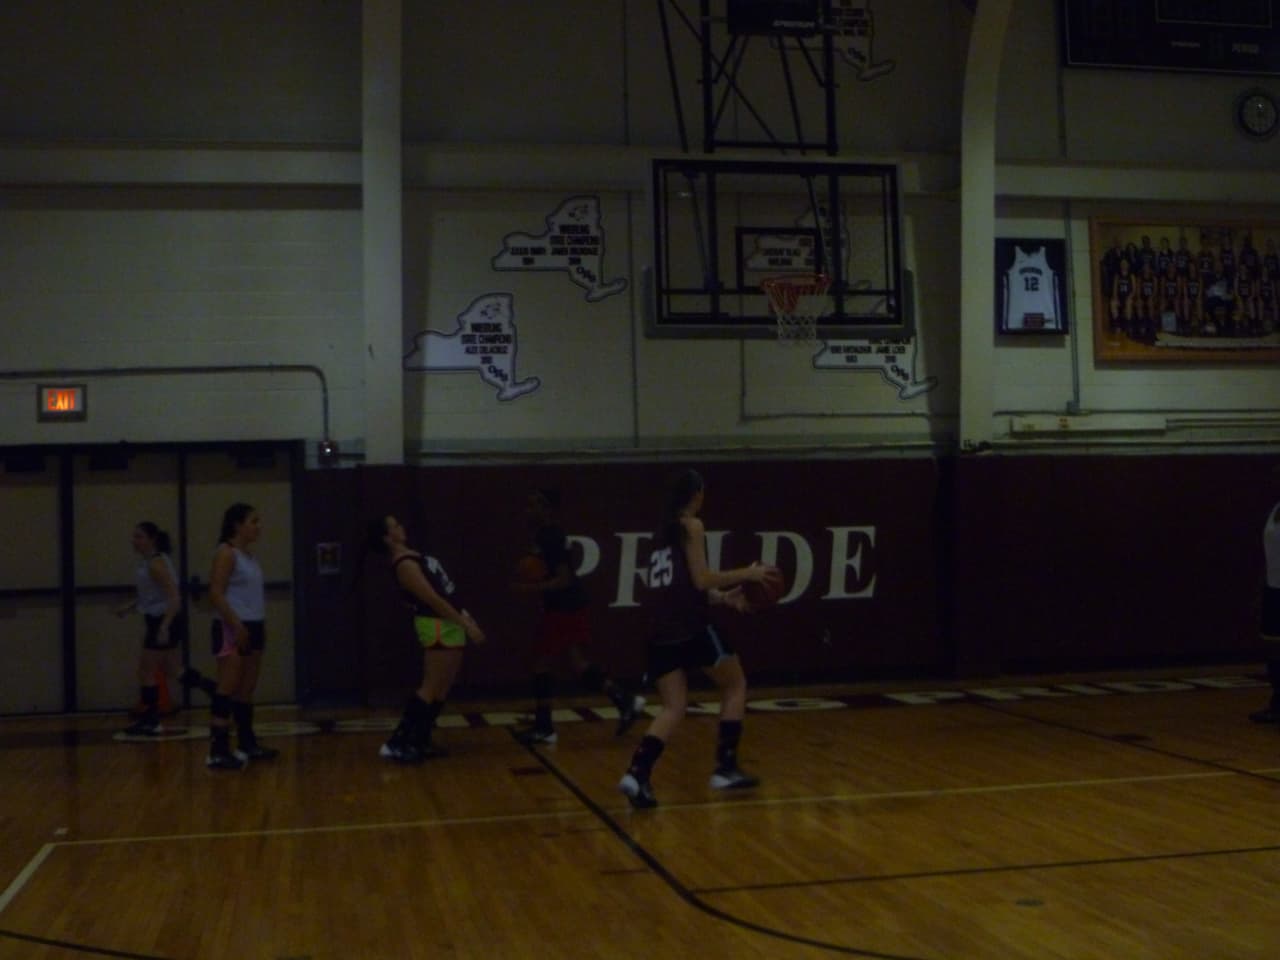 The Ossining girls basketball team practices for the state championships. None of the girls had seen Barack Obama's sitdown interview with Zach Galifinakis. 